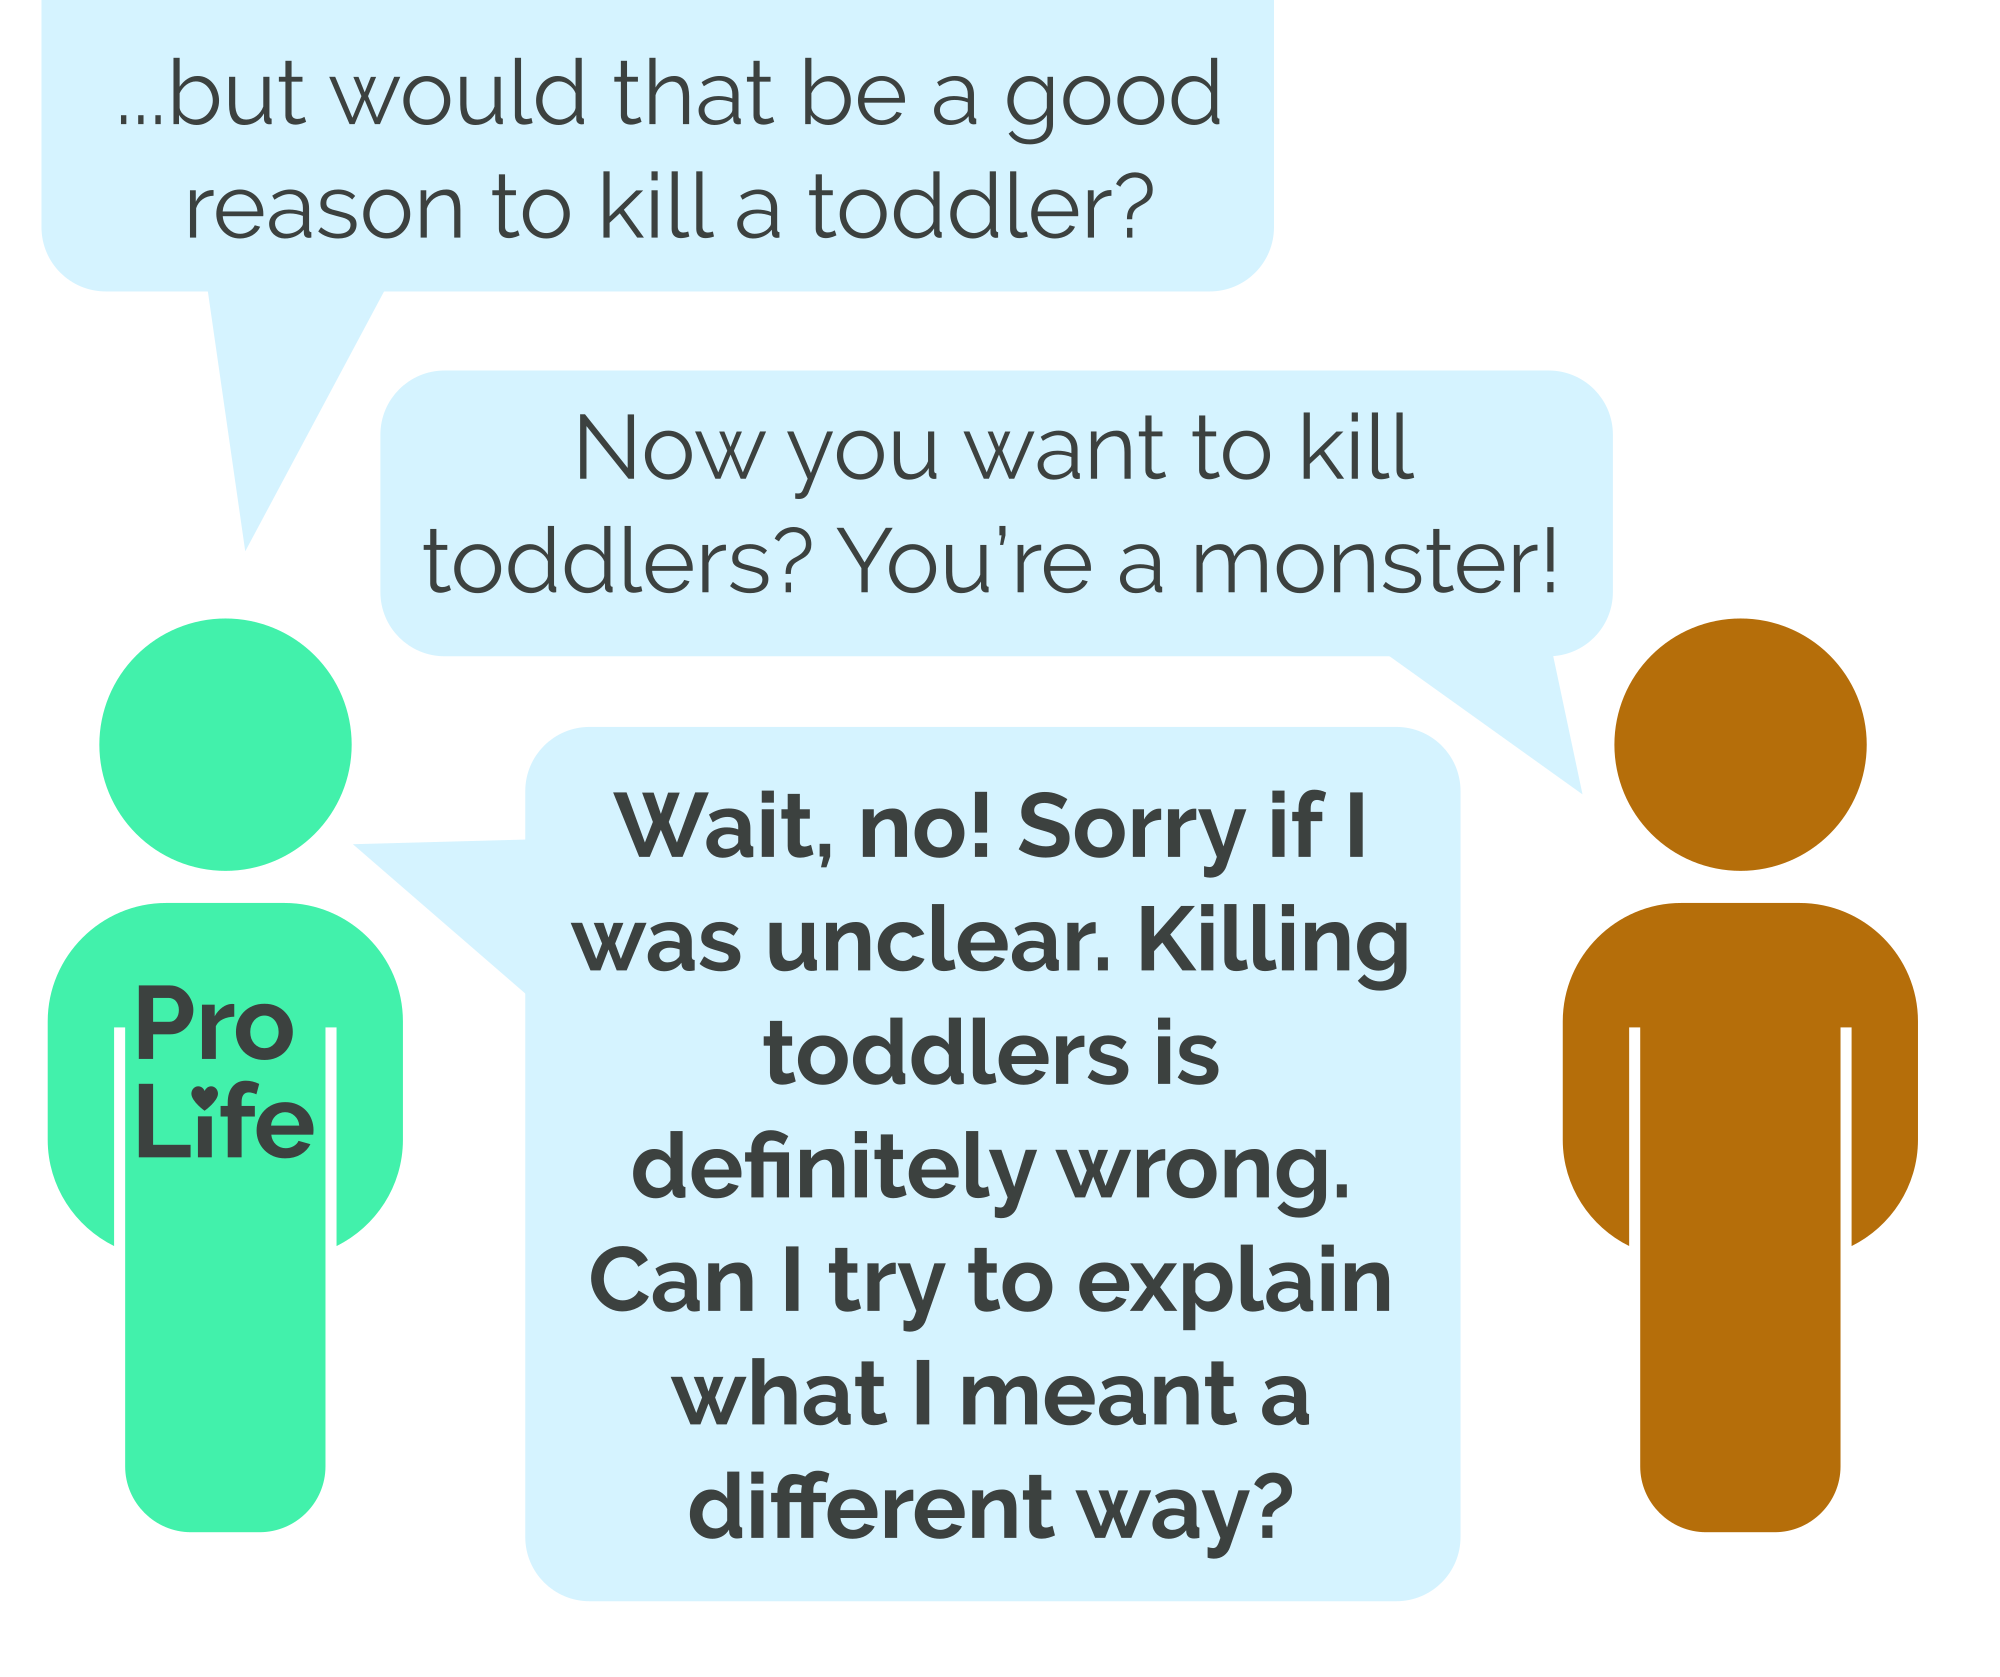 Person 1 (our hero): ...but would that be a good reason to kill a toddler? Person 2: Now you want to kill toddlers? You’re a monster! Person 1 (our hero): Wait, no! Sorry if I was unclear. Killing toddlers is definitely wrong. Can I try to explain what I meant a different way?